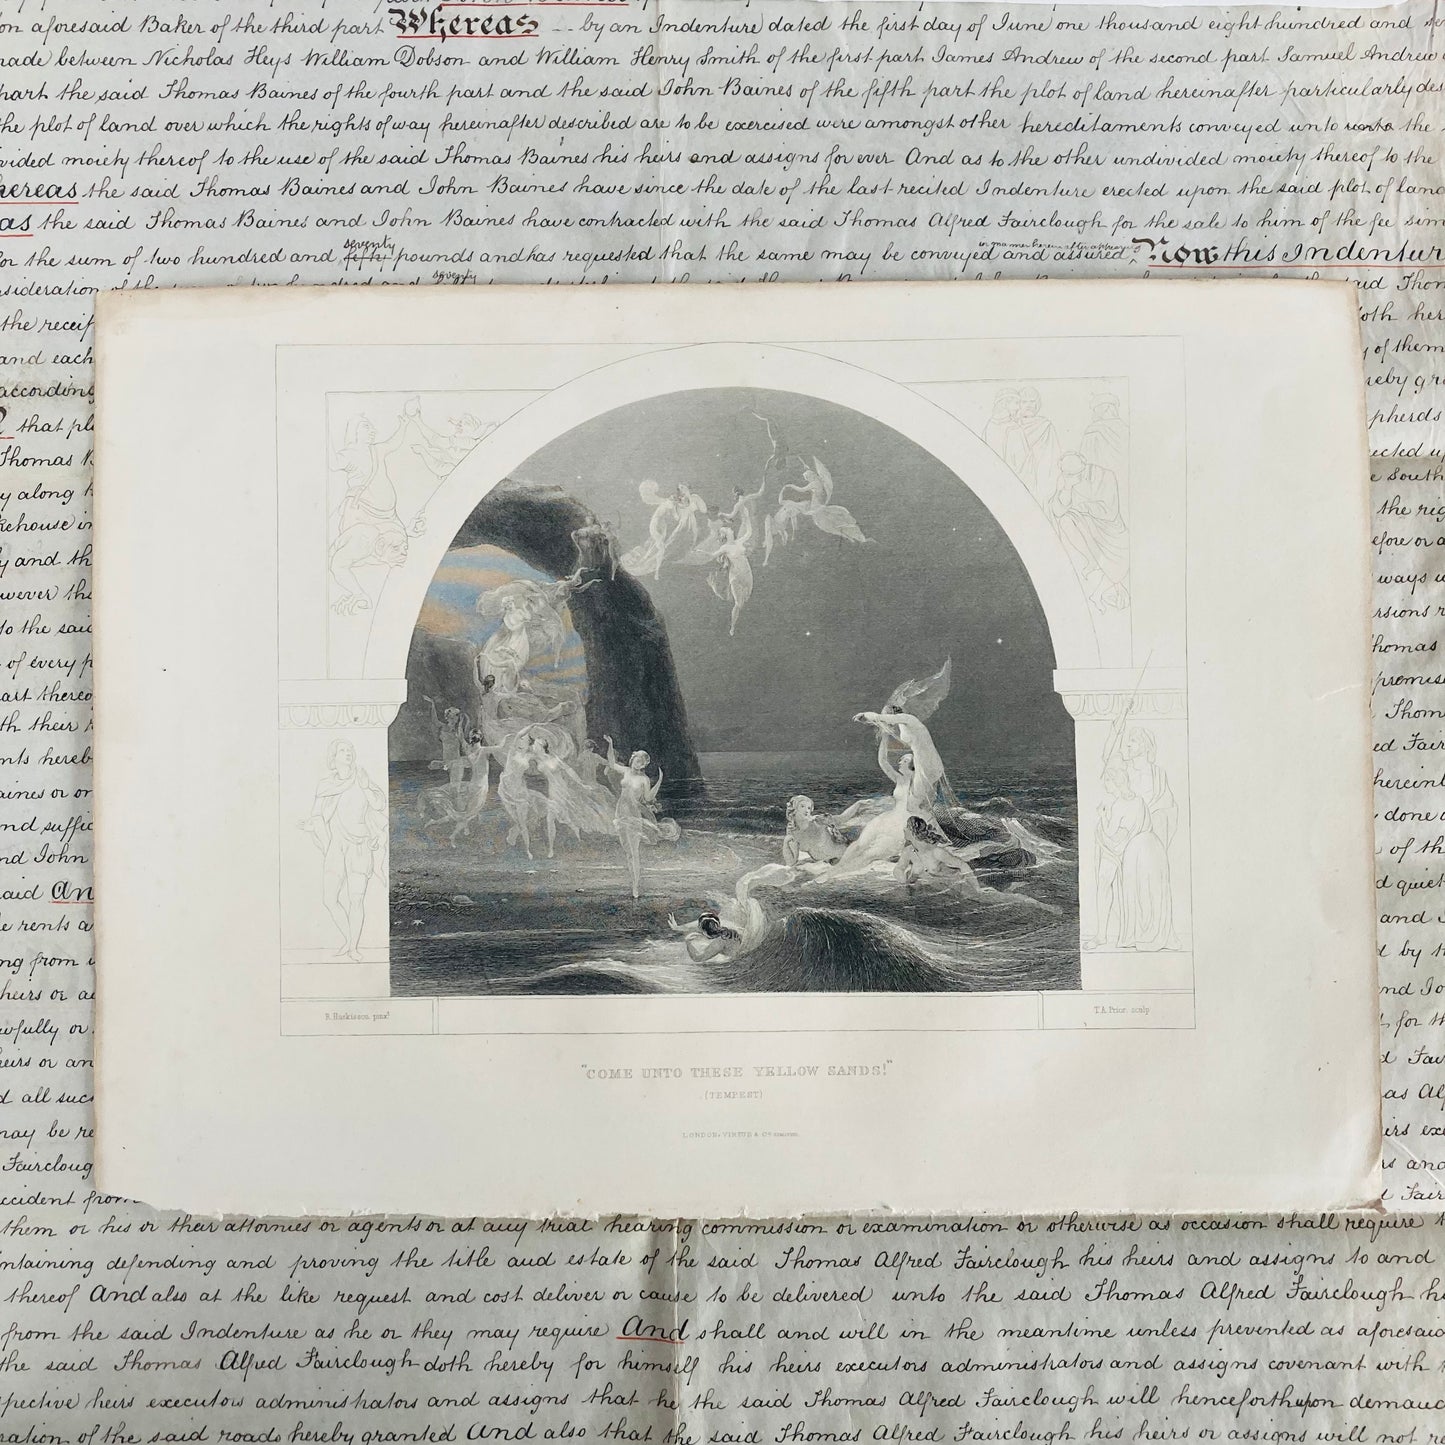 Antique Etching Plate Engraving of a Scene in Shakespeare’s Works